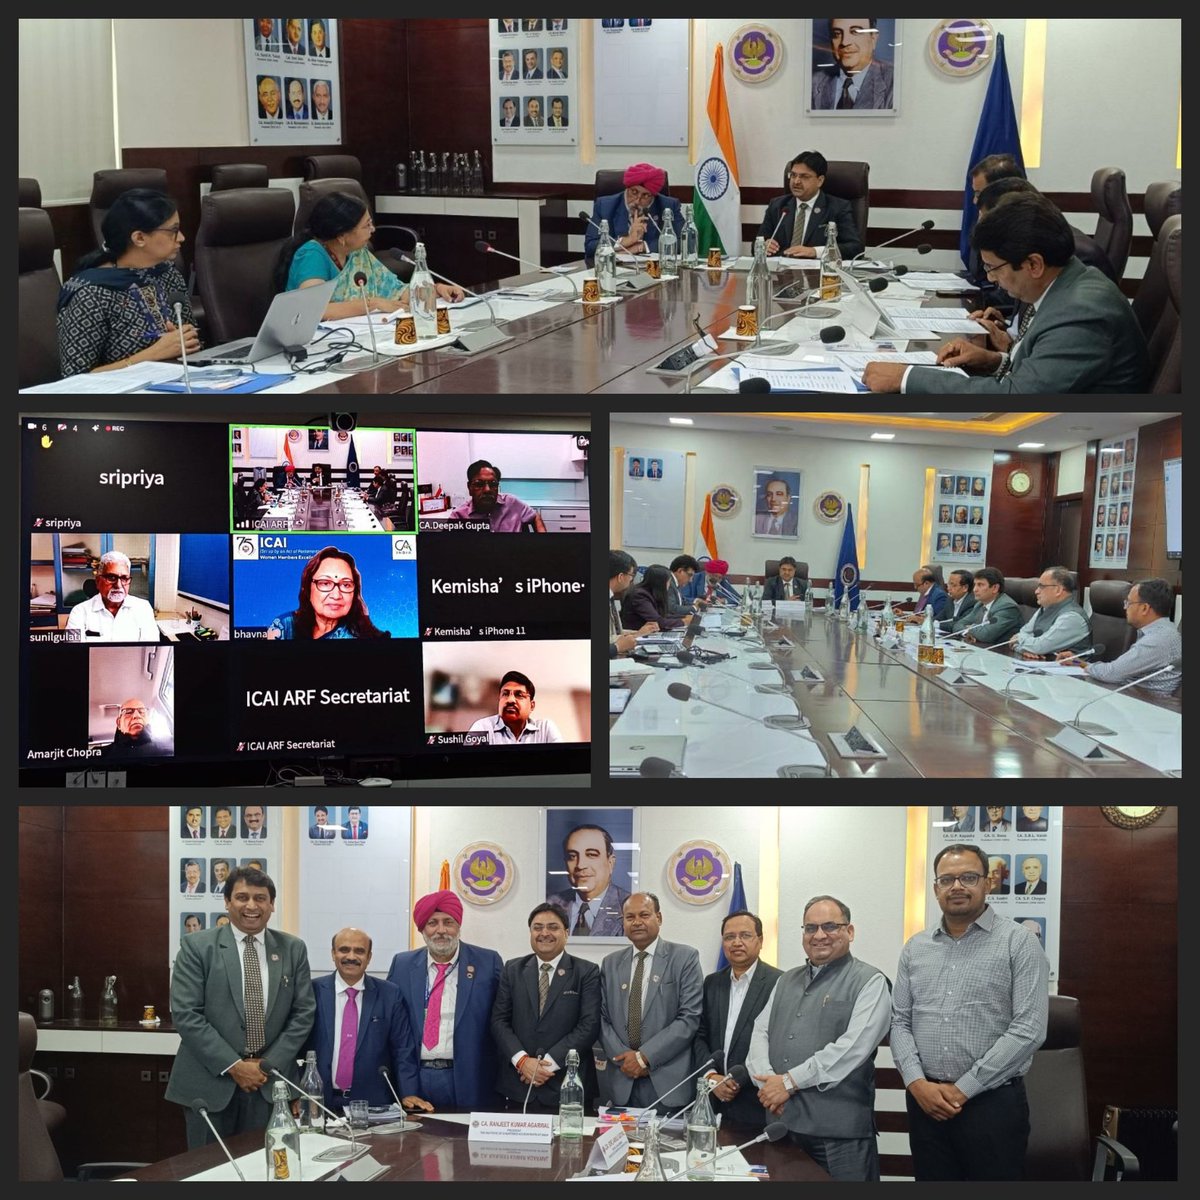 CA. Ranjeet K. Agarwal, President with CA. Charanjot S. Nanda-VP, Past President CA. Amarjit Chopra, CCMs, other Committee & Board Members at the Meetings of ICAI Accounting Research Foundation & Public Relations Committee-ICAI at New Delhi today . #ICAIat75 #DRISHTI